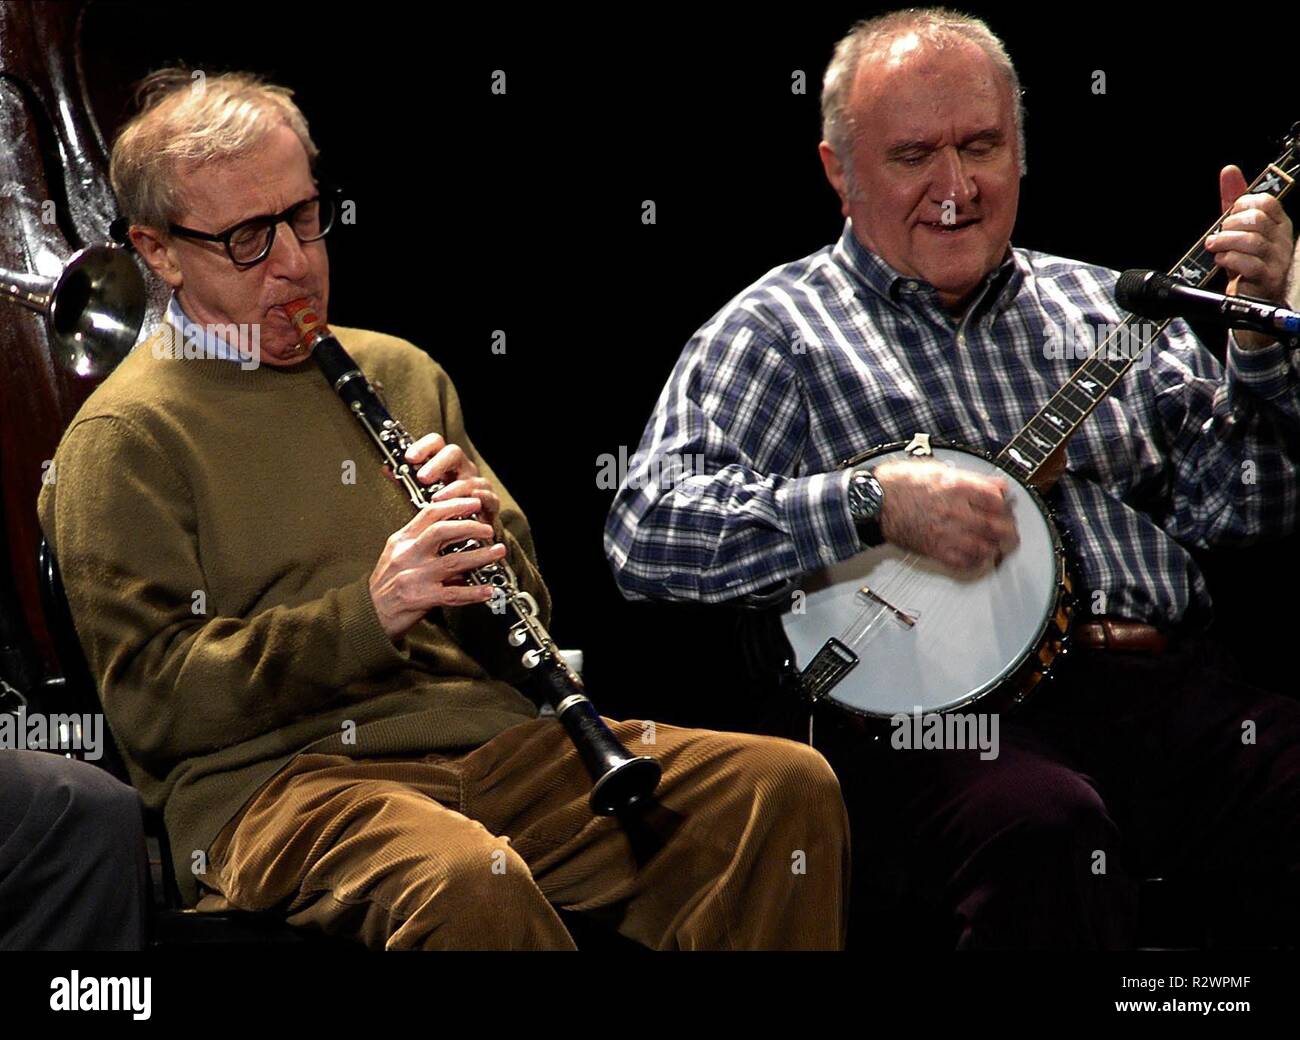 WOODY ALLEN NEW ORLEANS JAZZ BAND MILANO 22 dicembre 200578294 CTT Foto Stock